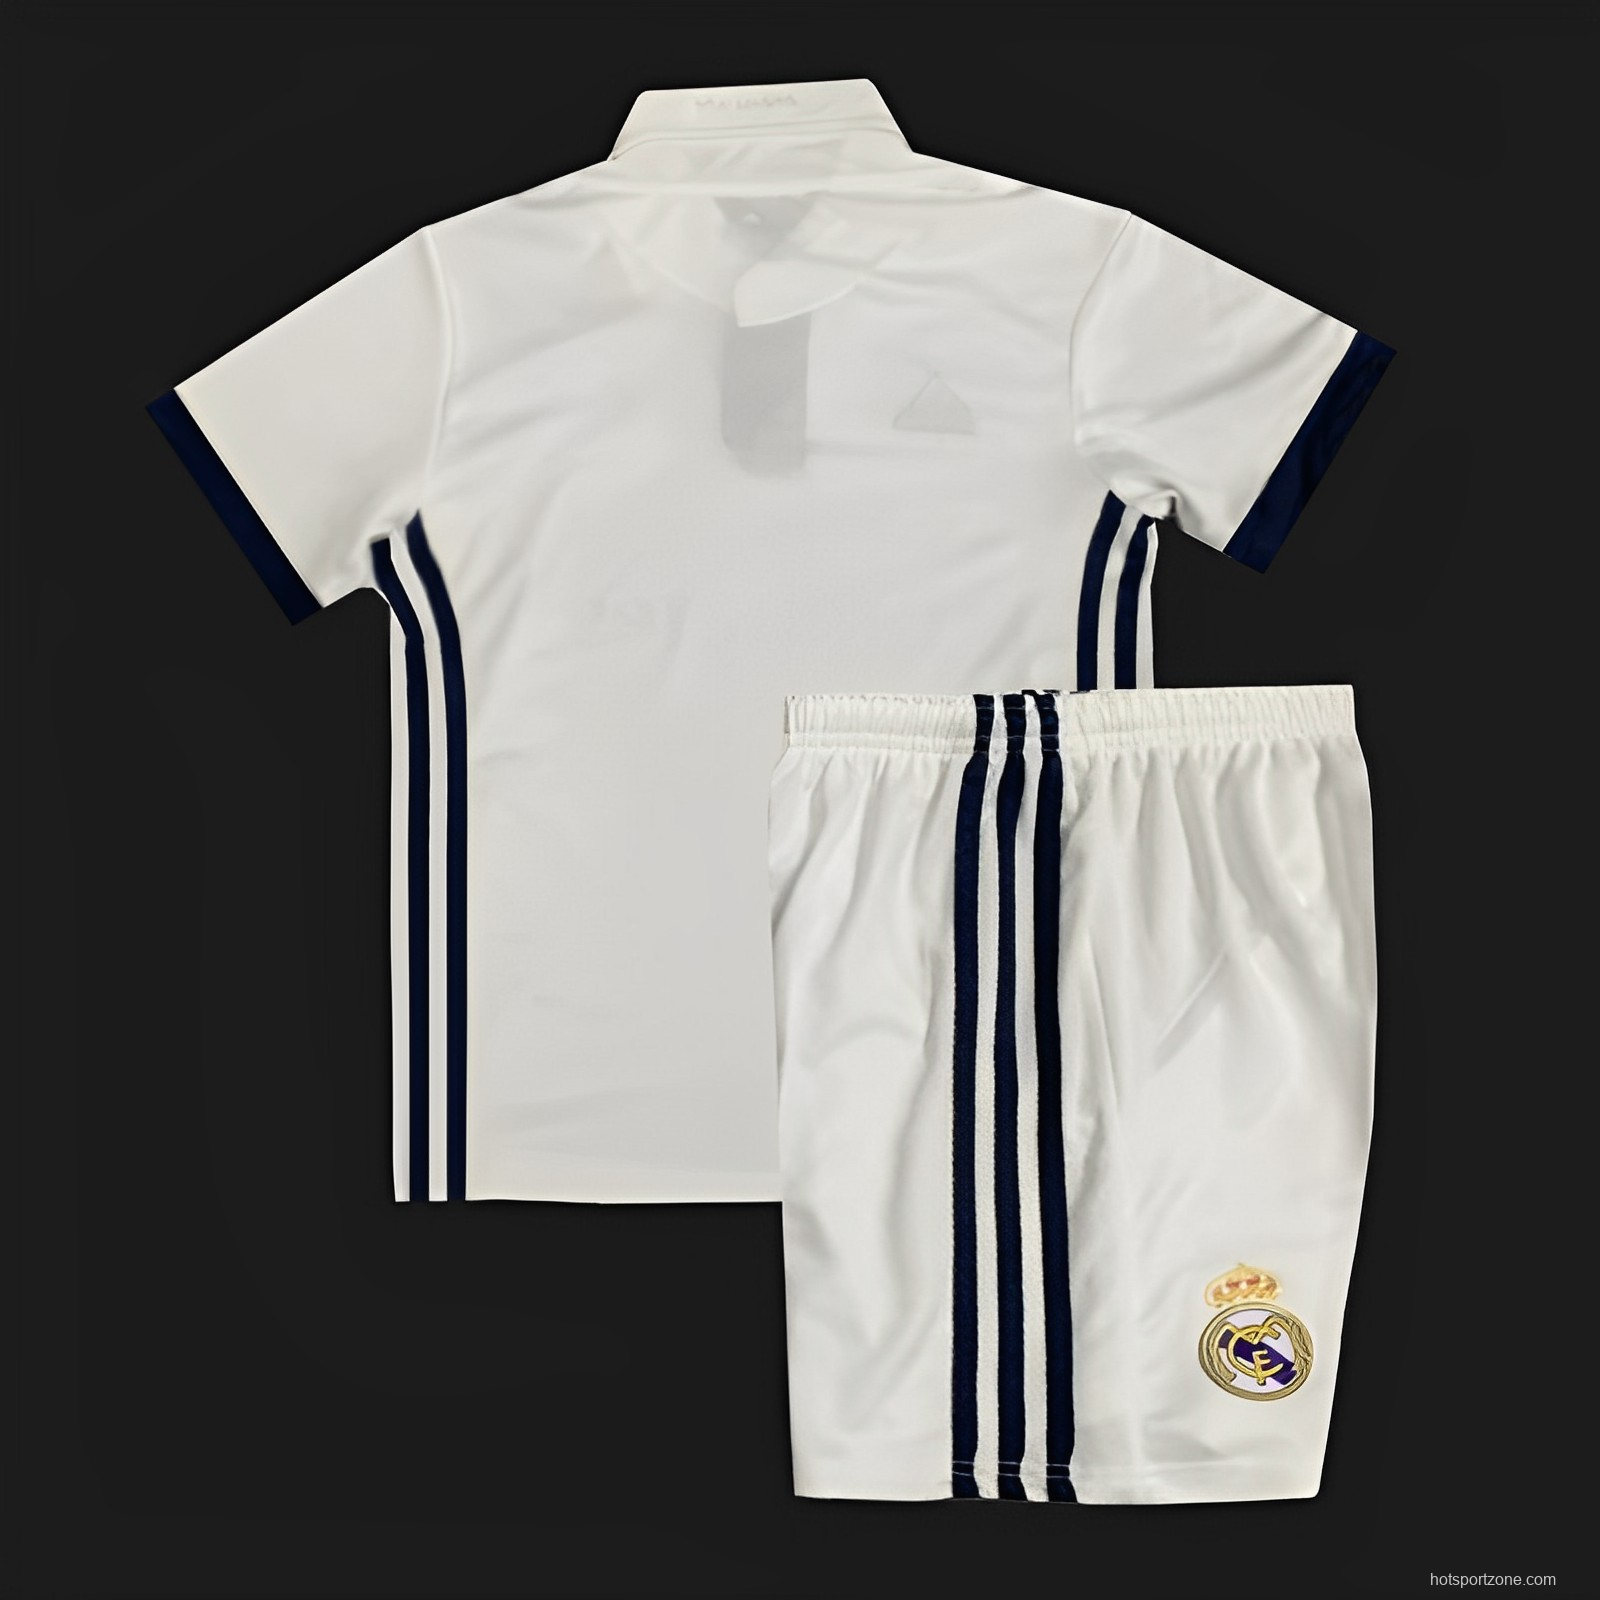 Retro 16/17 Kids Real Madrid Home Jersey